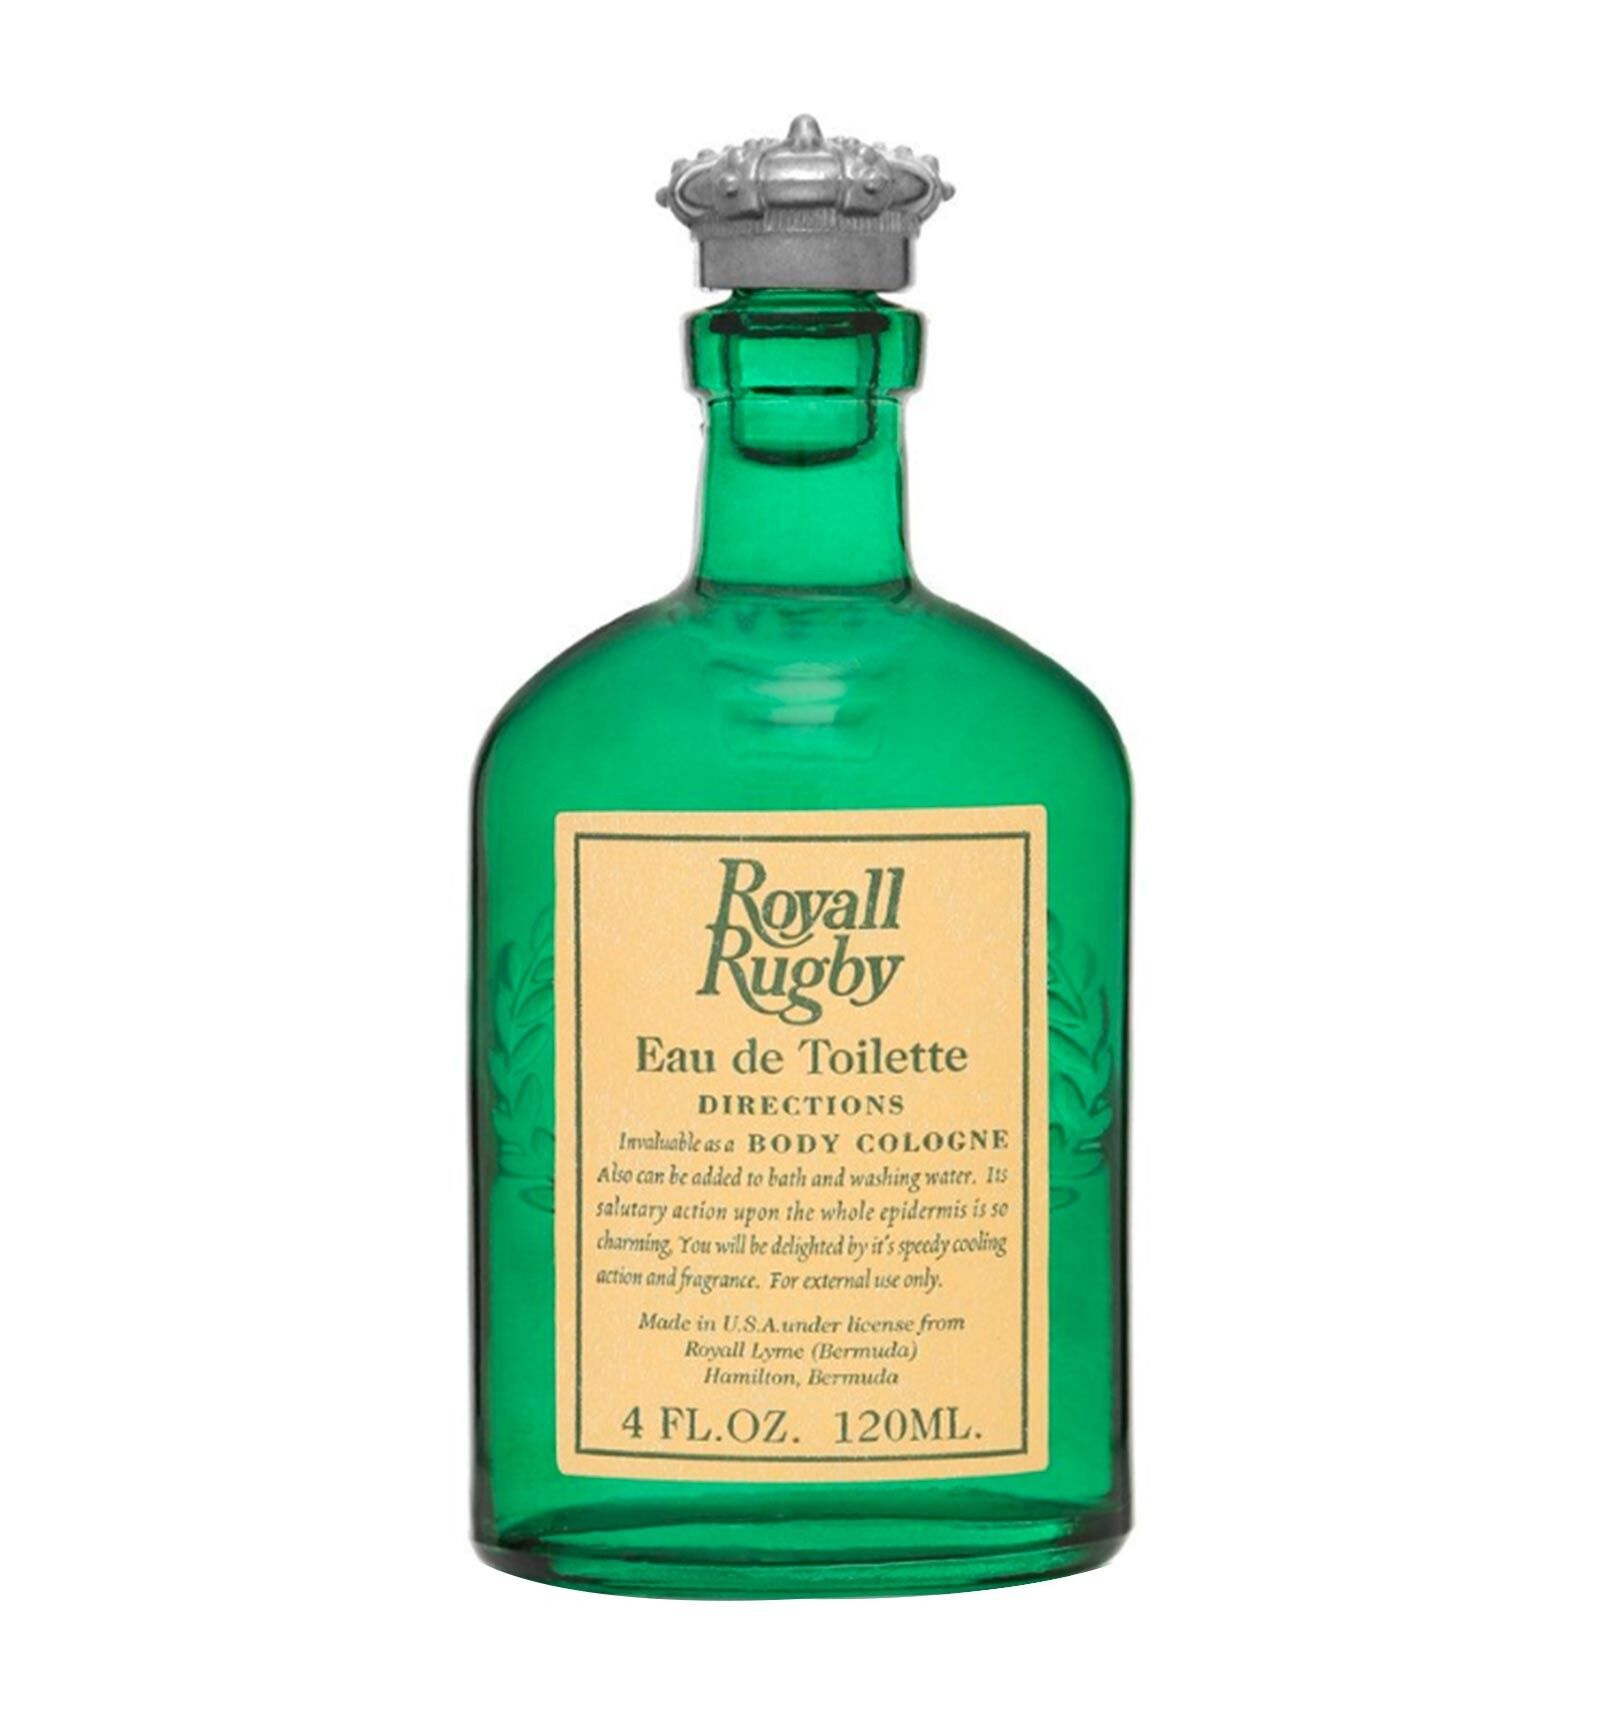 Royall Lyme Bermuda Limited Royall Rugby Eau de Toilette Natural